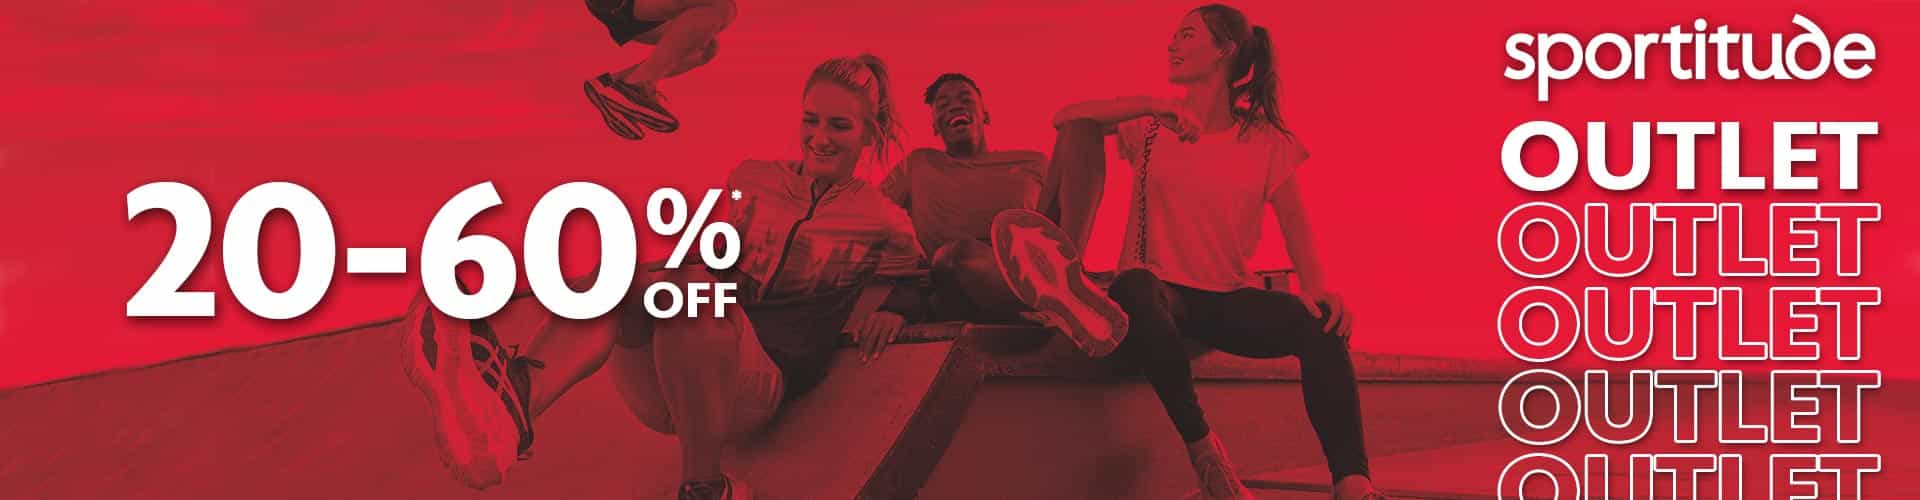 Up to 60% OFF on clearance outlet items at Sportitude